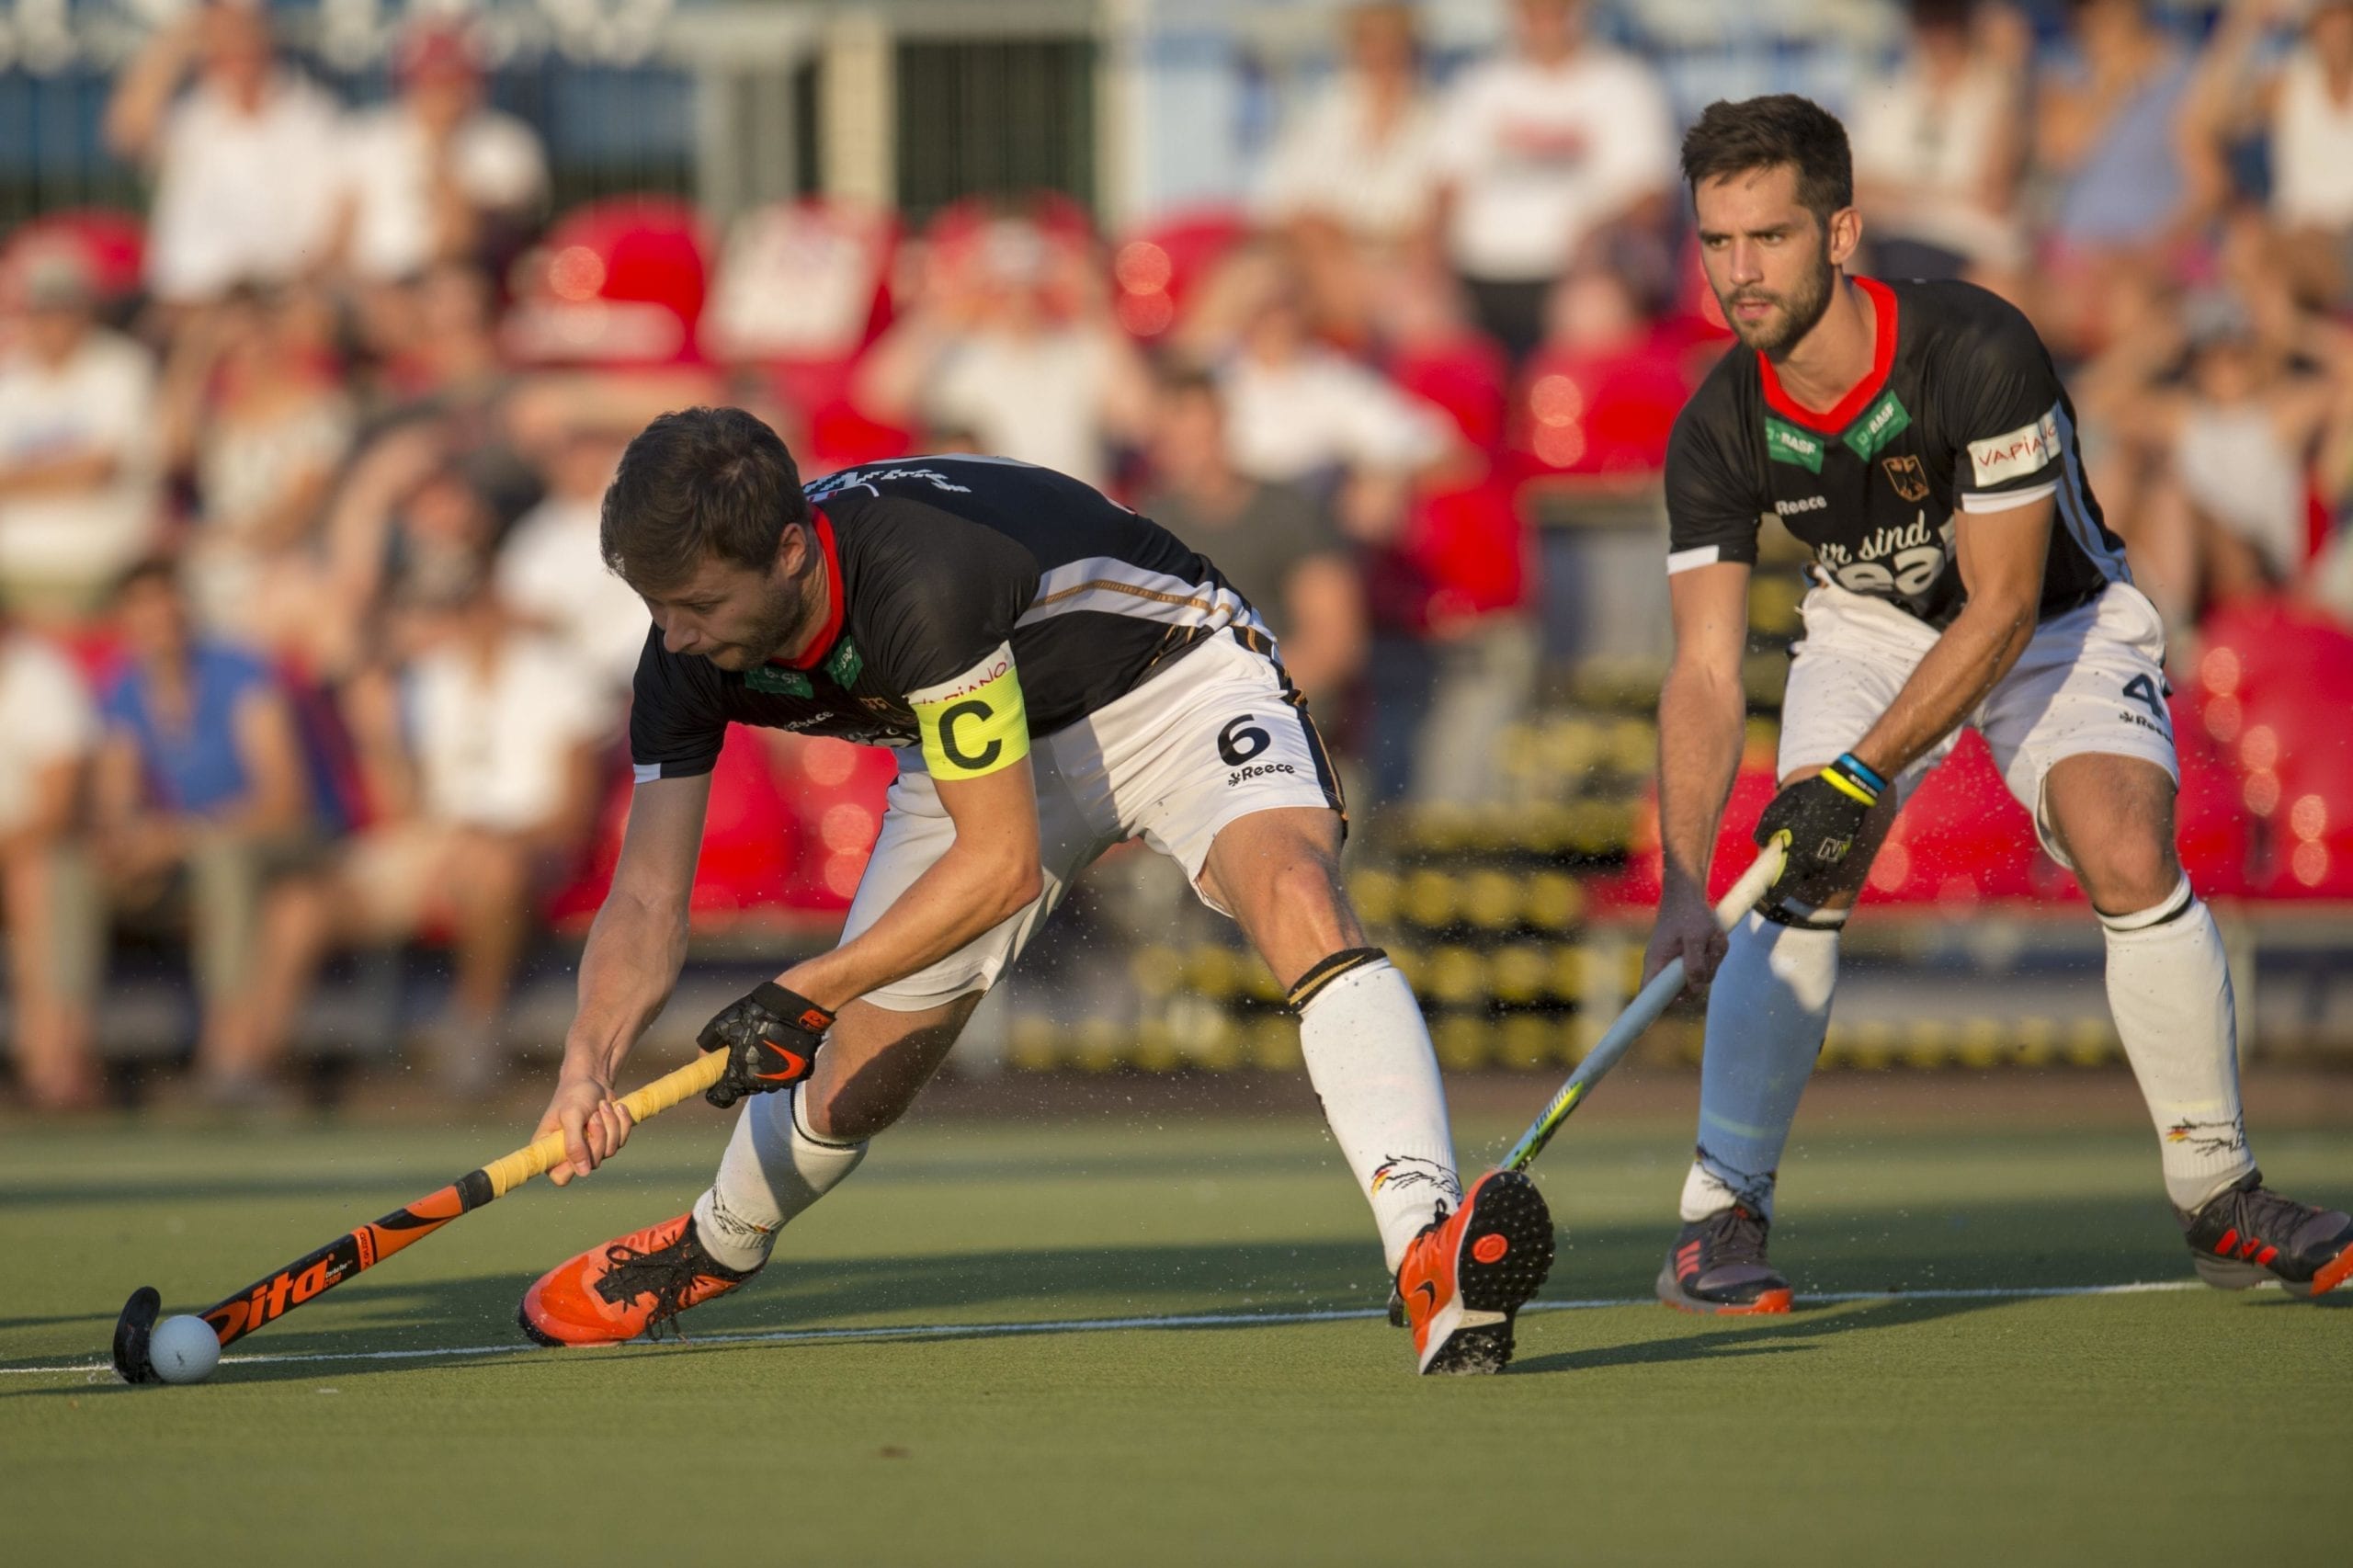 Hockey in Germany: a sport on the rise (2)